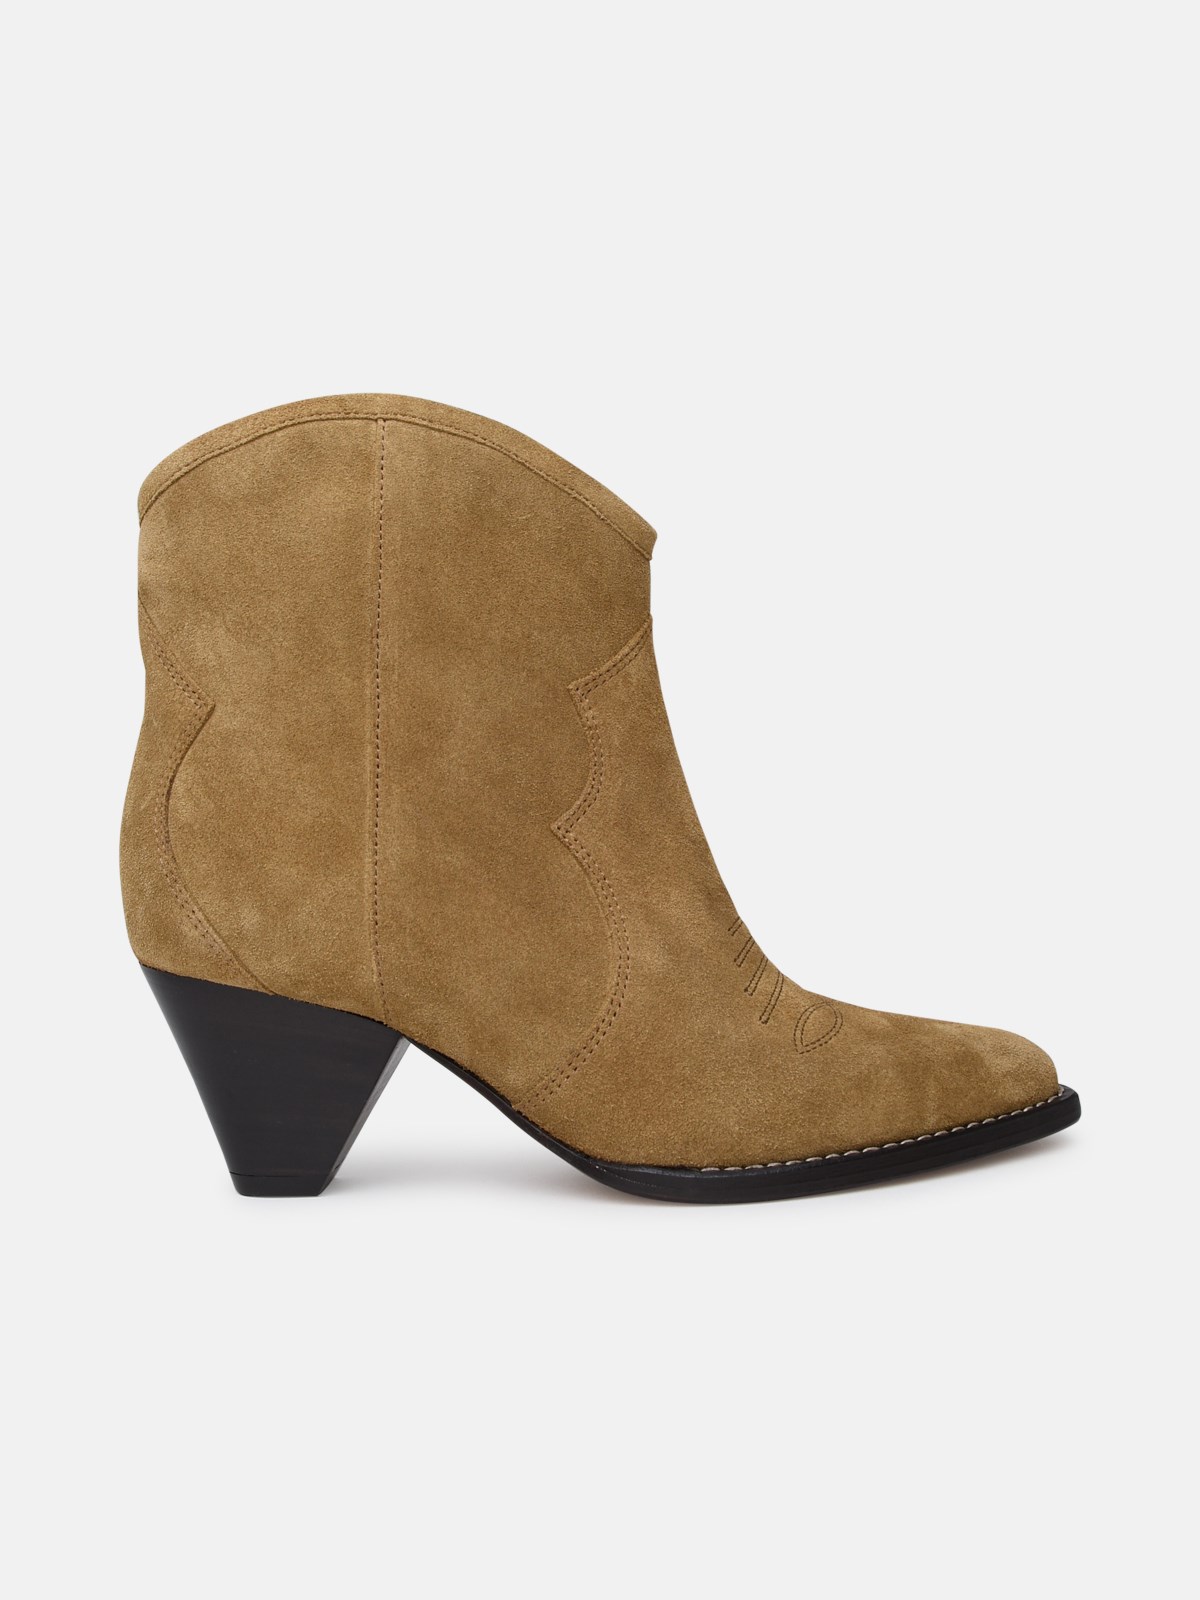 Isabel Marant Beige Darizo Suede Ankle Boots